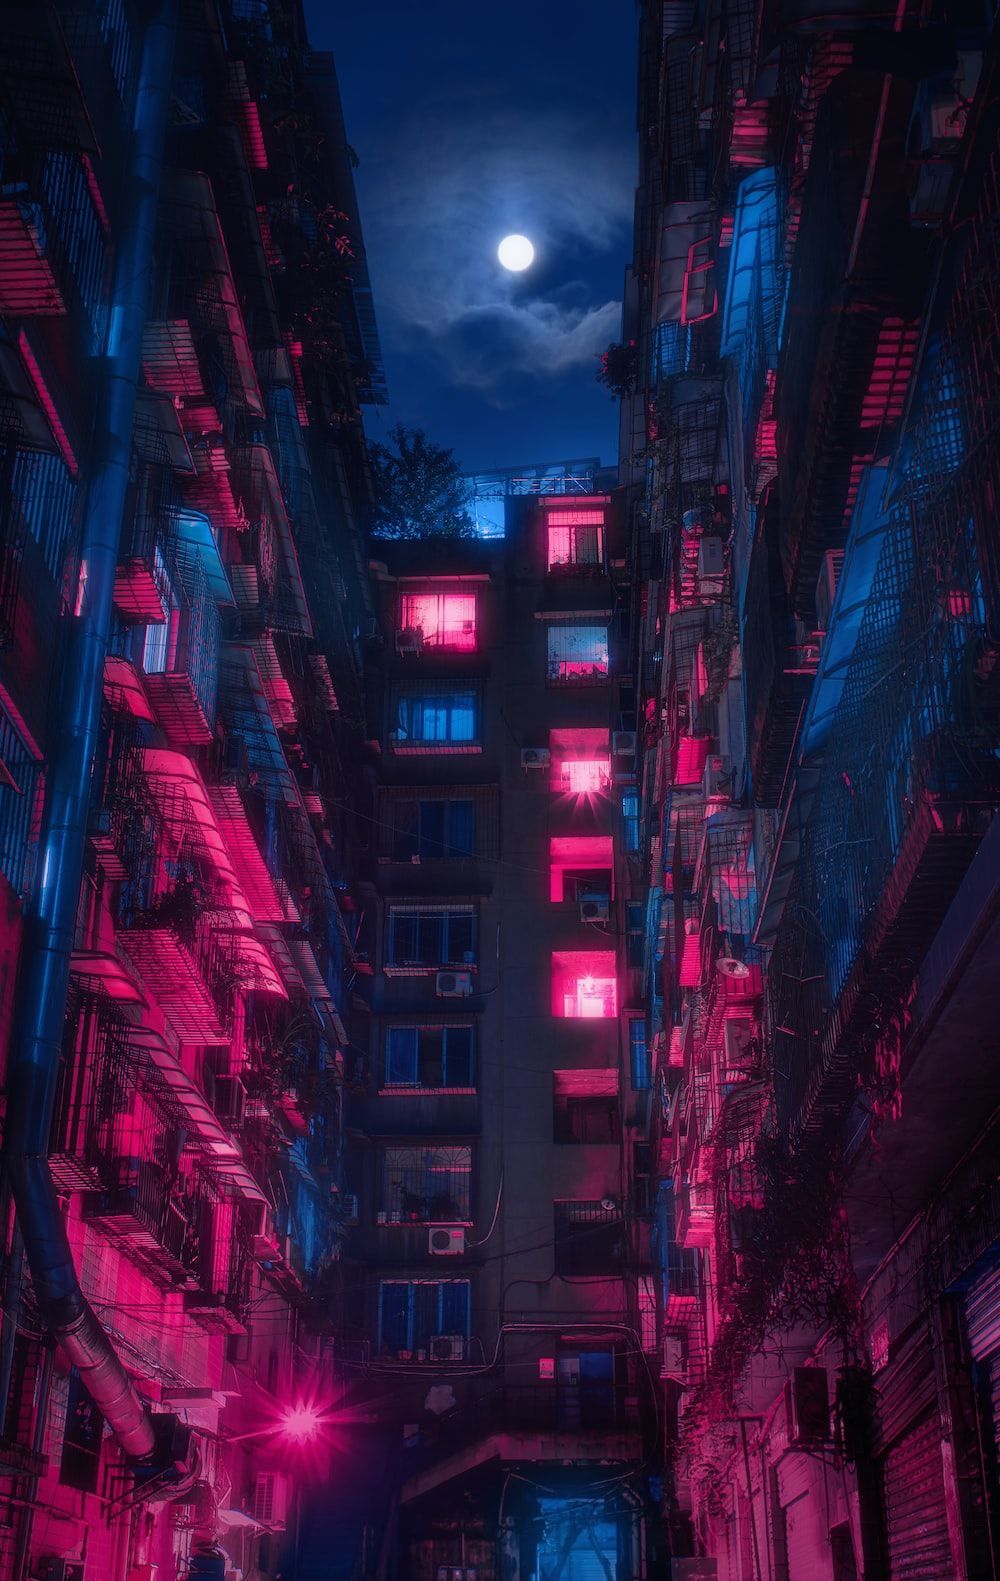 Cyberpunk Aesthetic Picture. Download Free Image